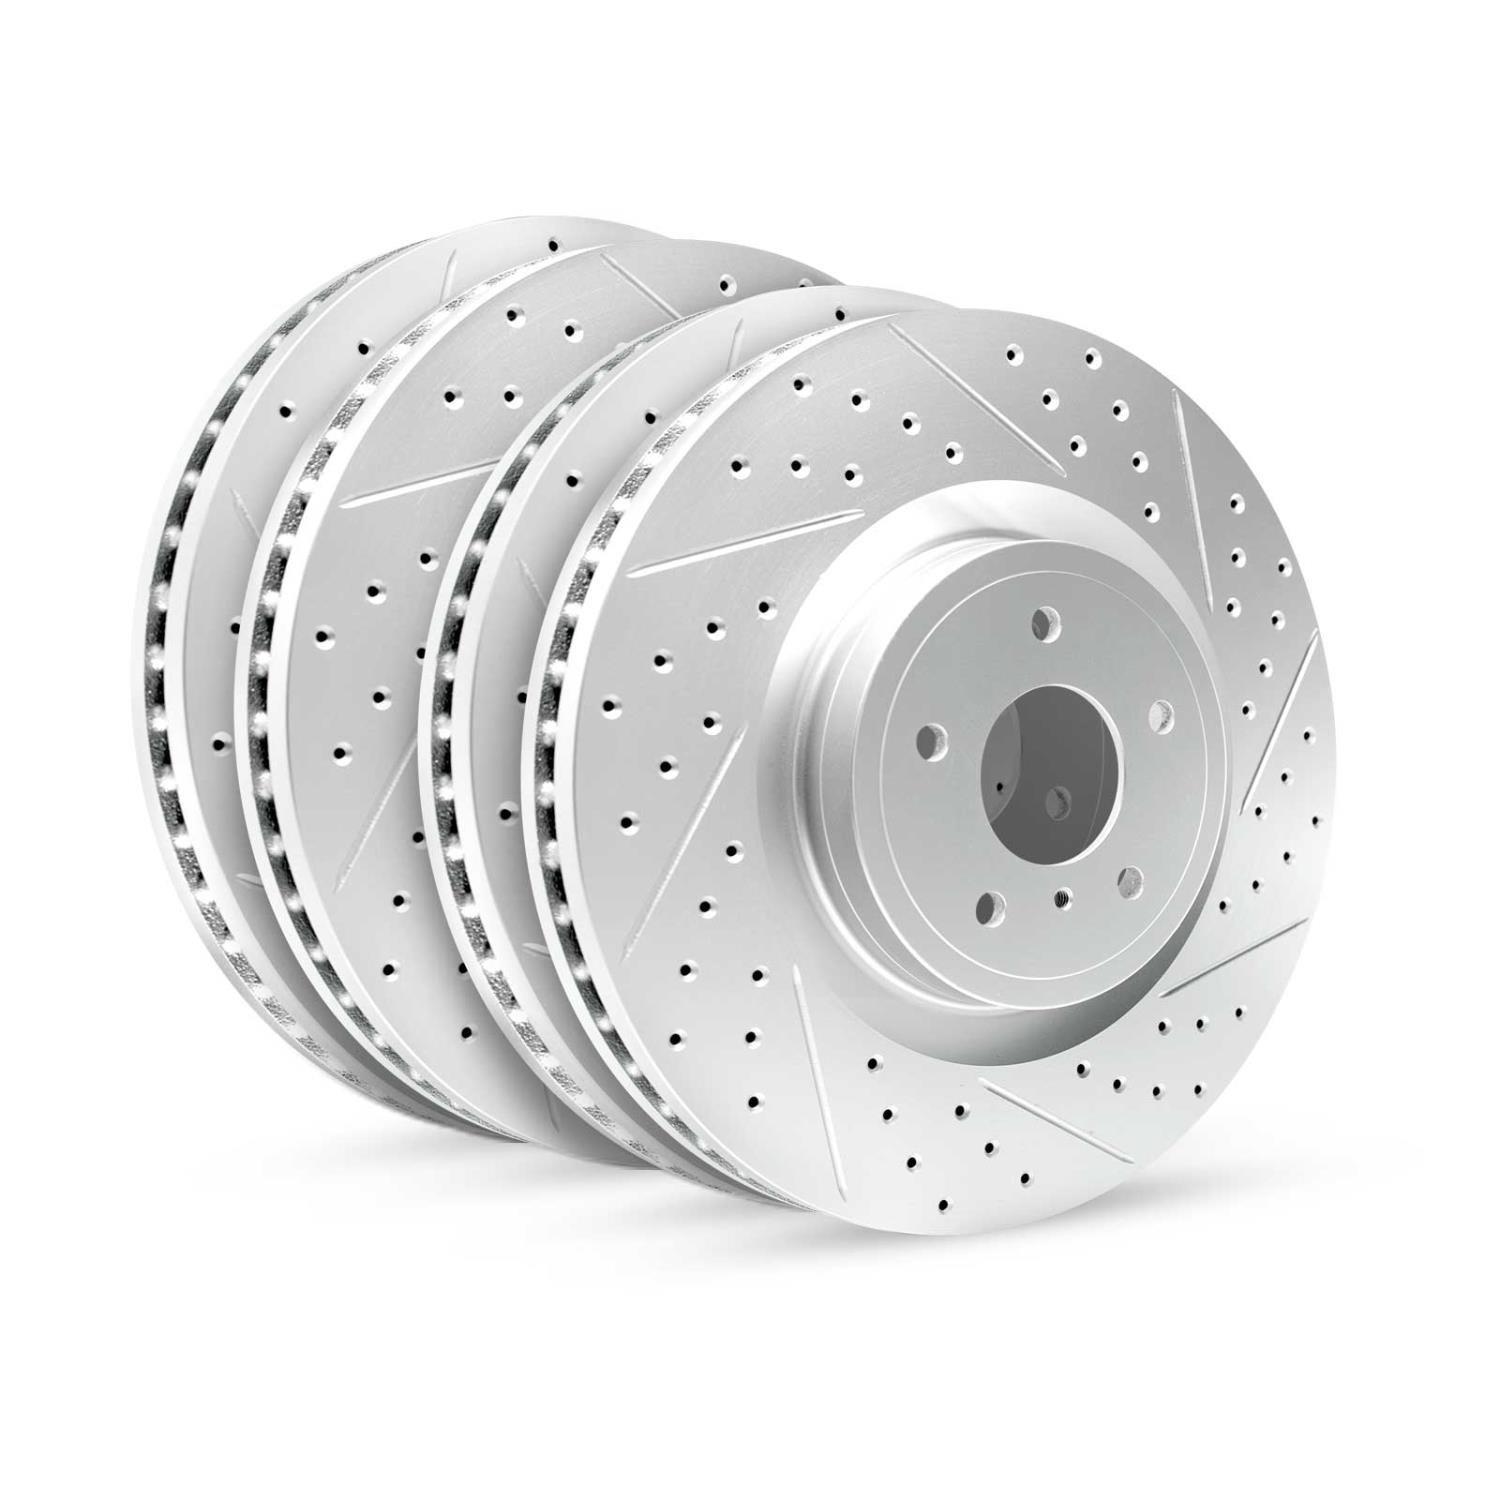 GEO-Carbon Drilled/Slotted Rotors, 1987-1989